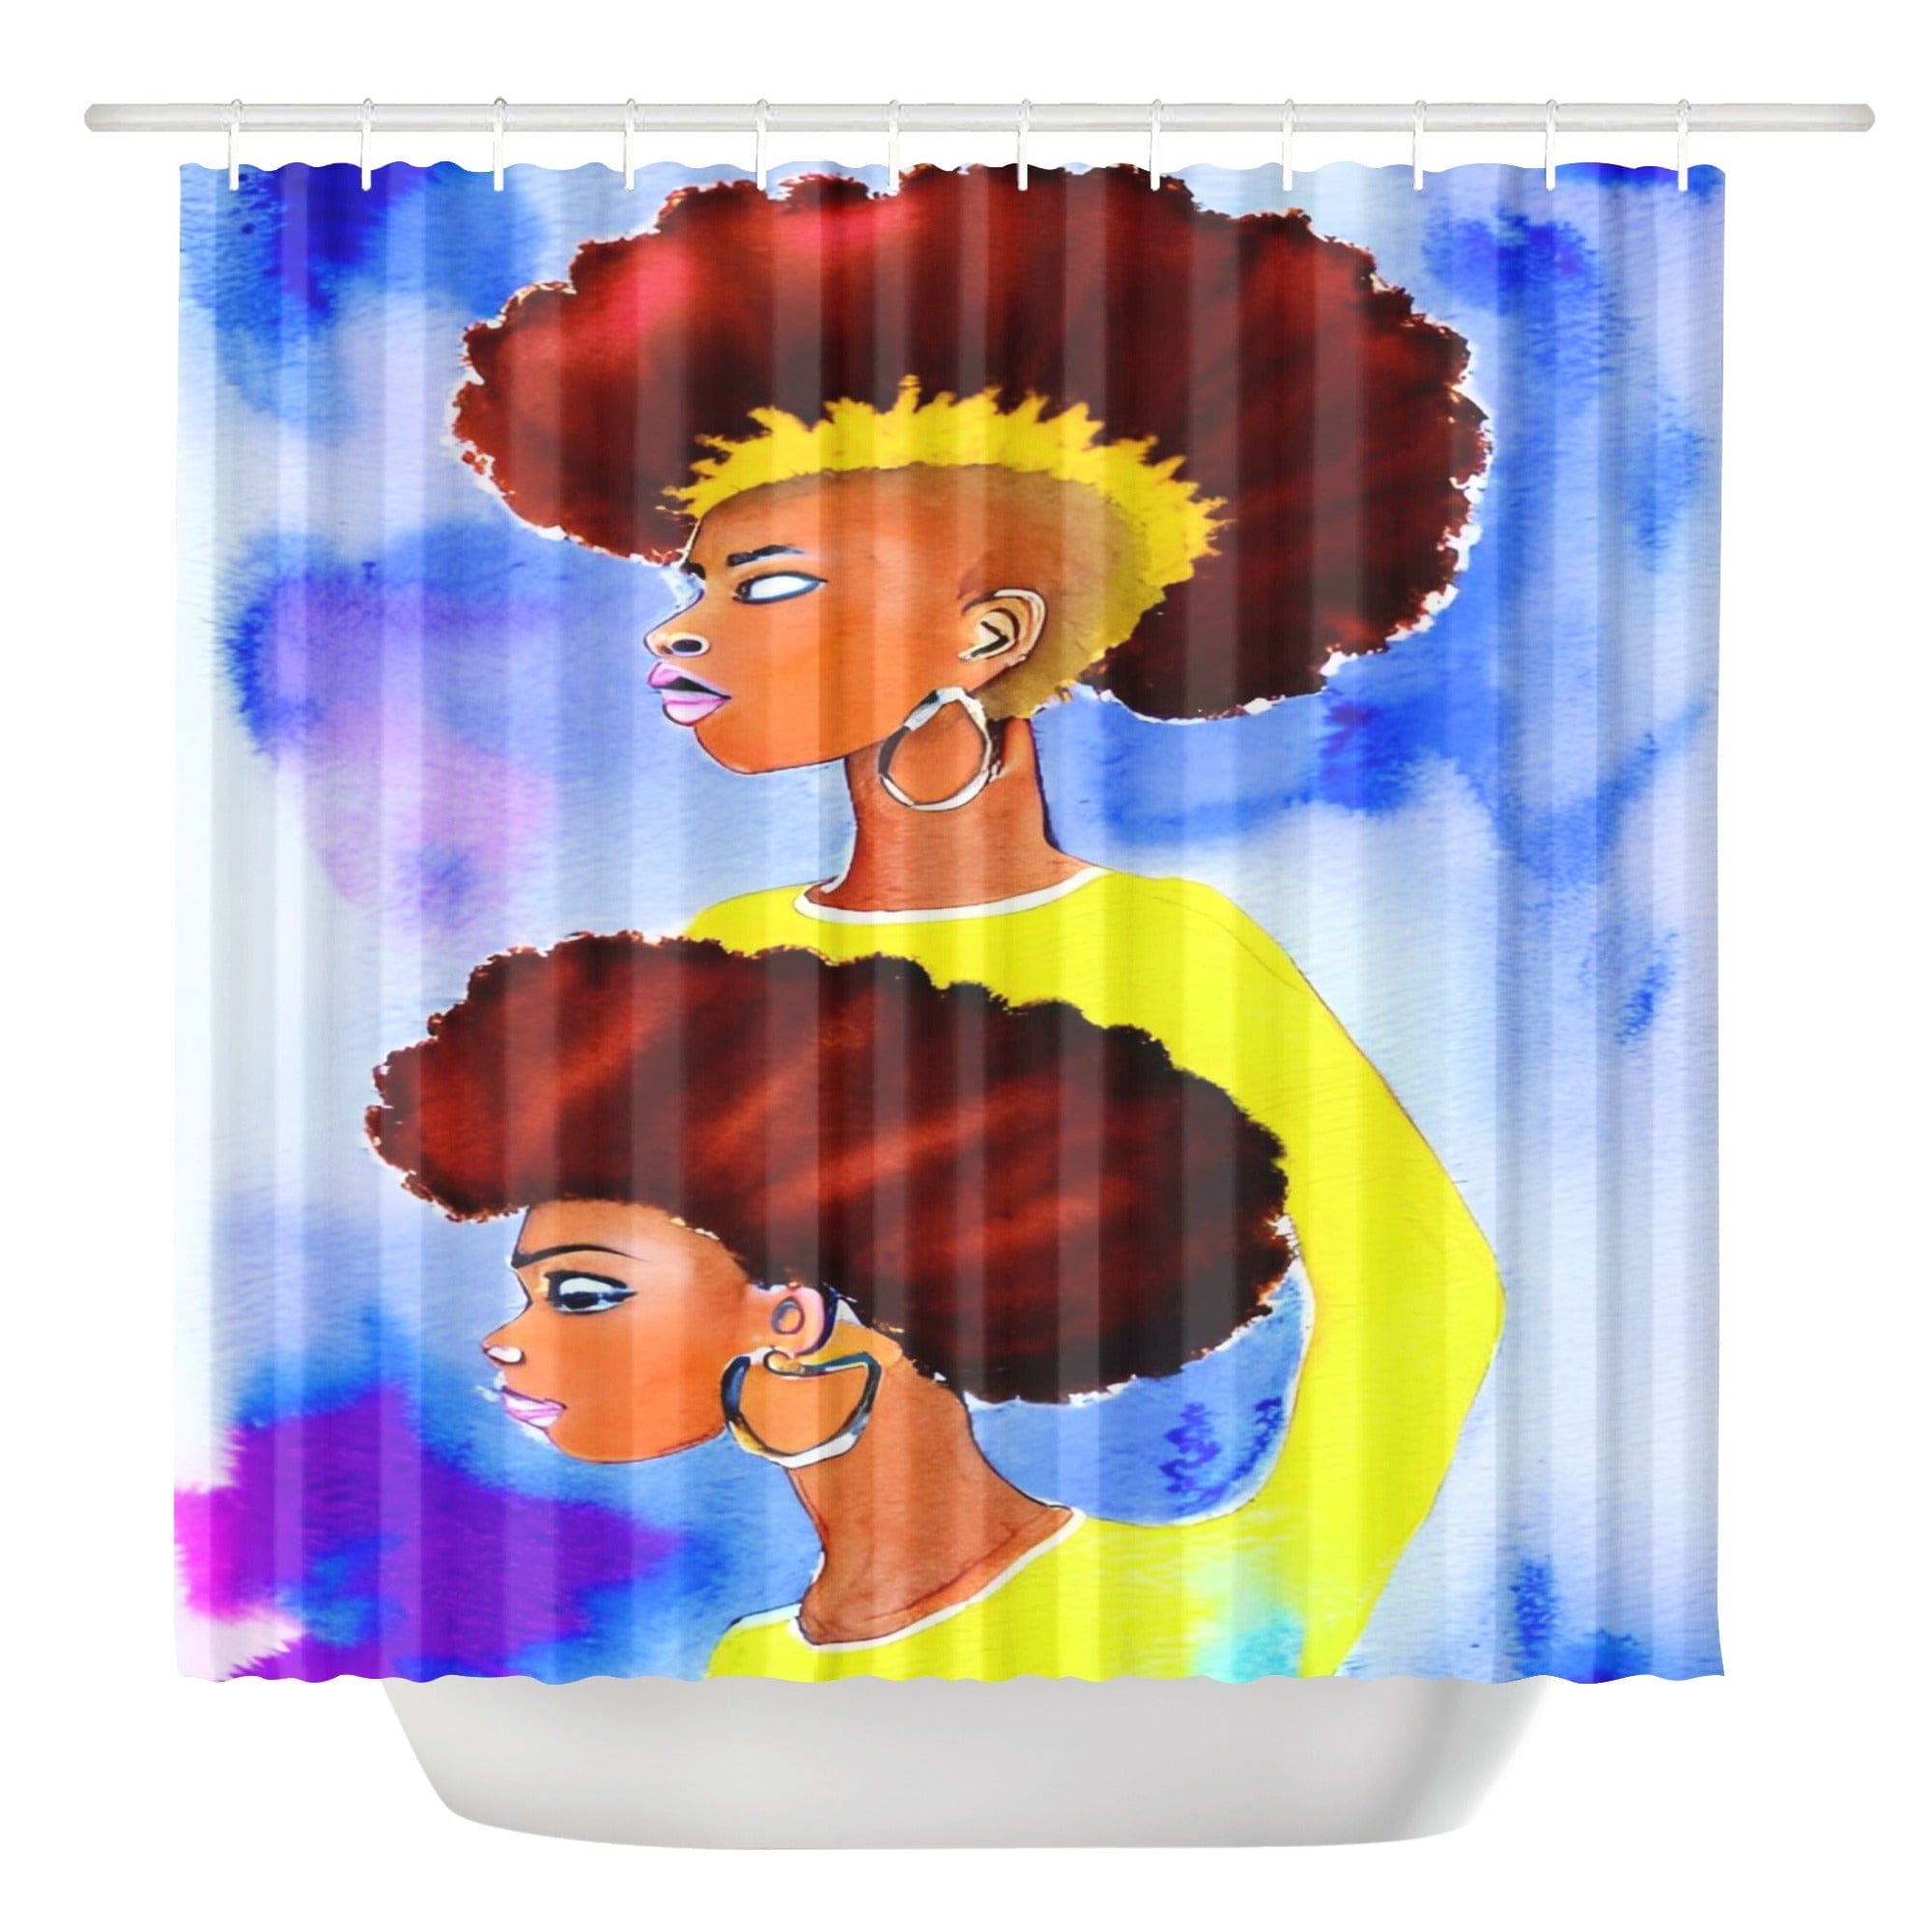 Grunge Fro Shower Curtain - shower curtain at TFC&H Co.